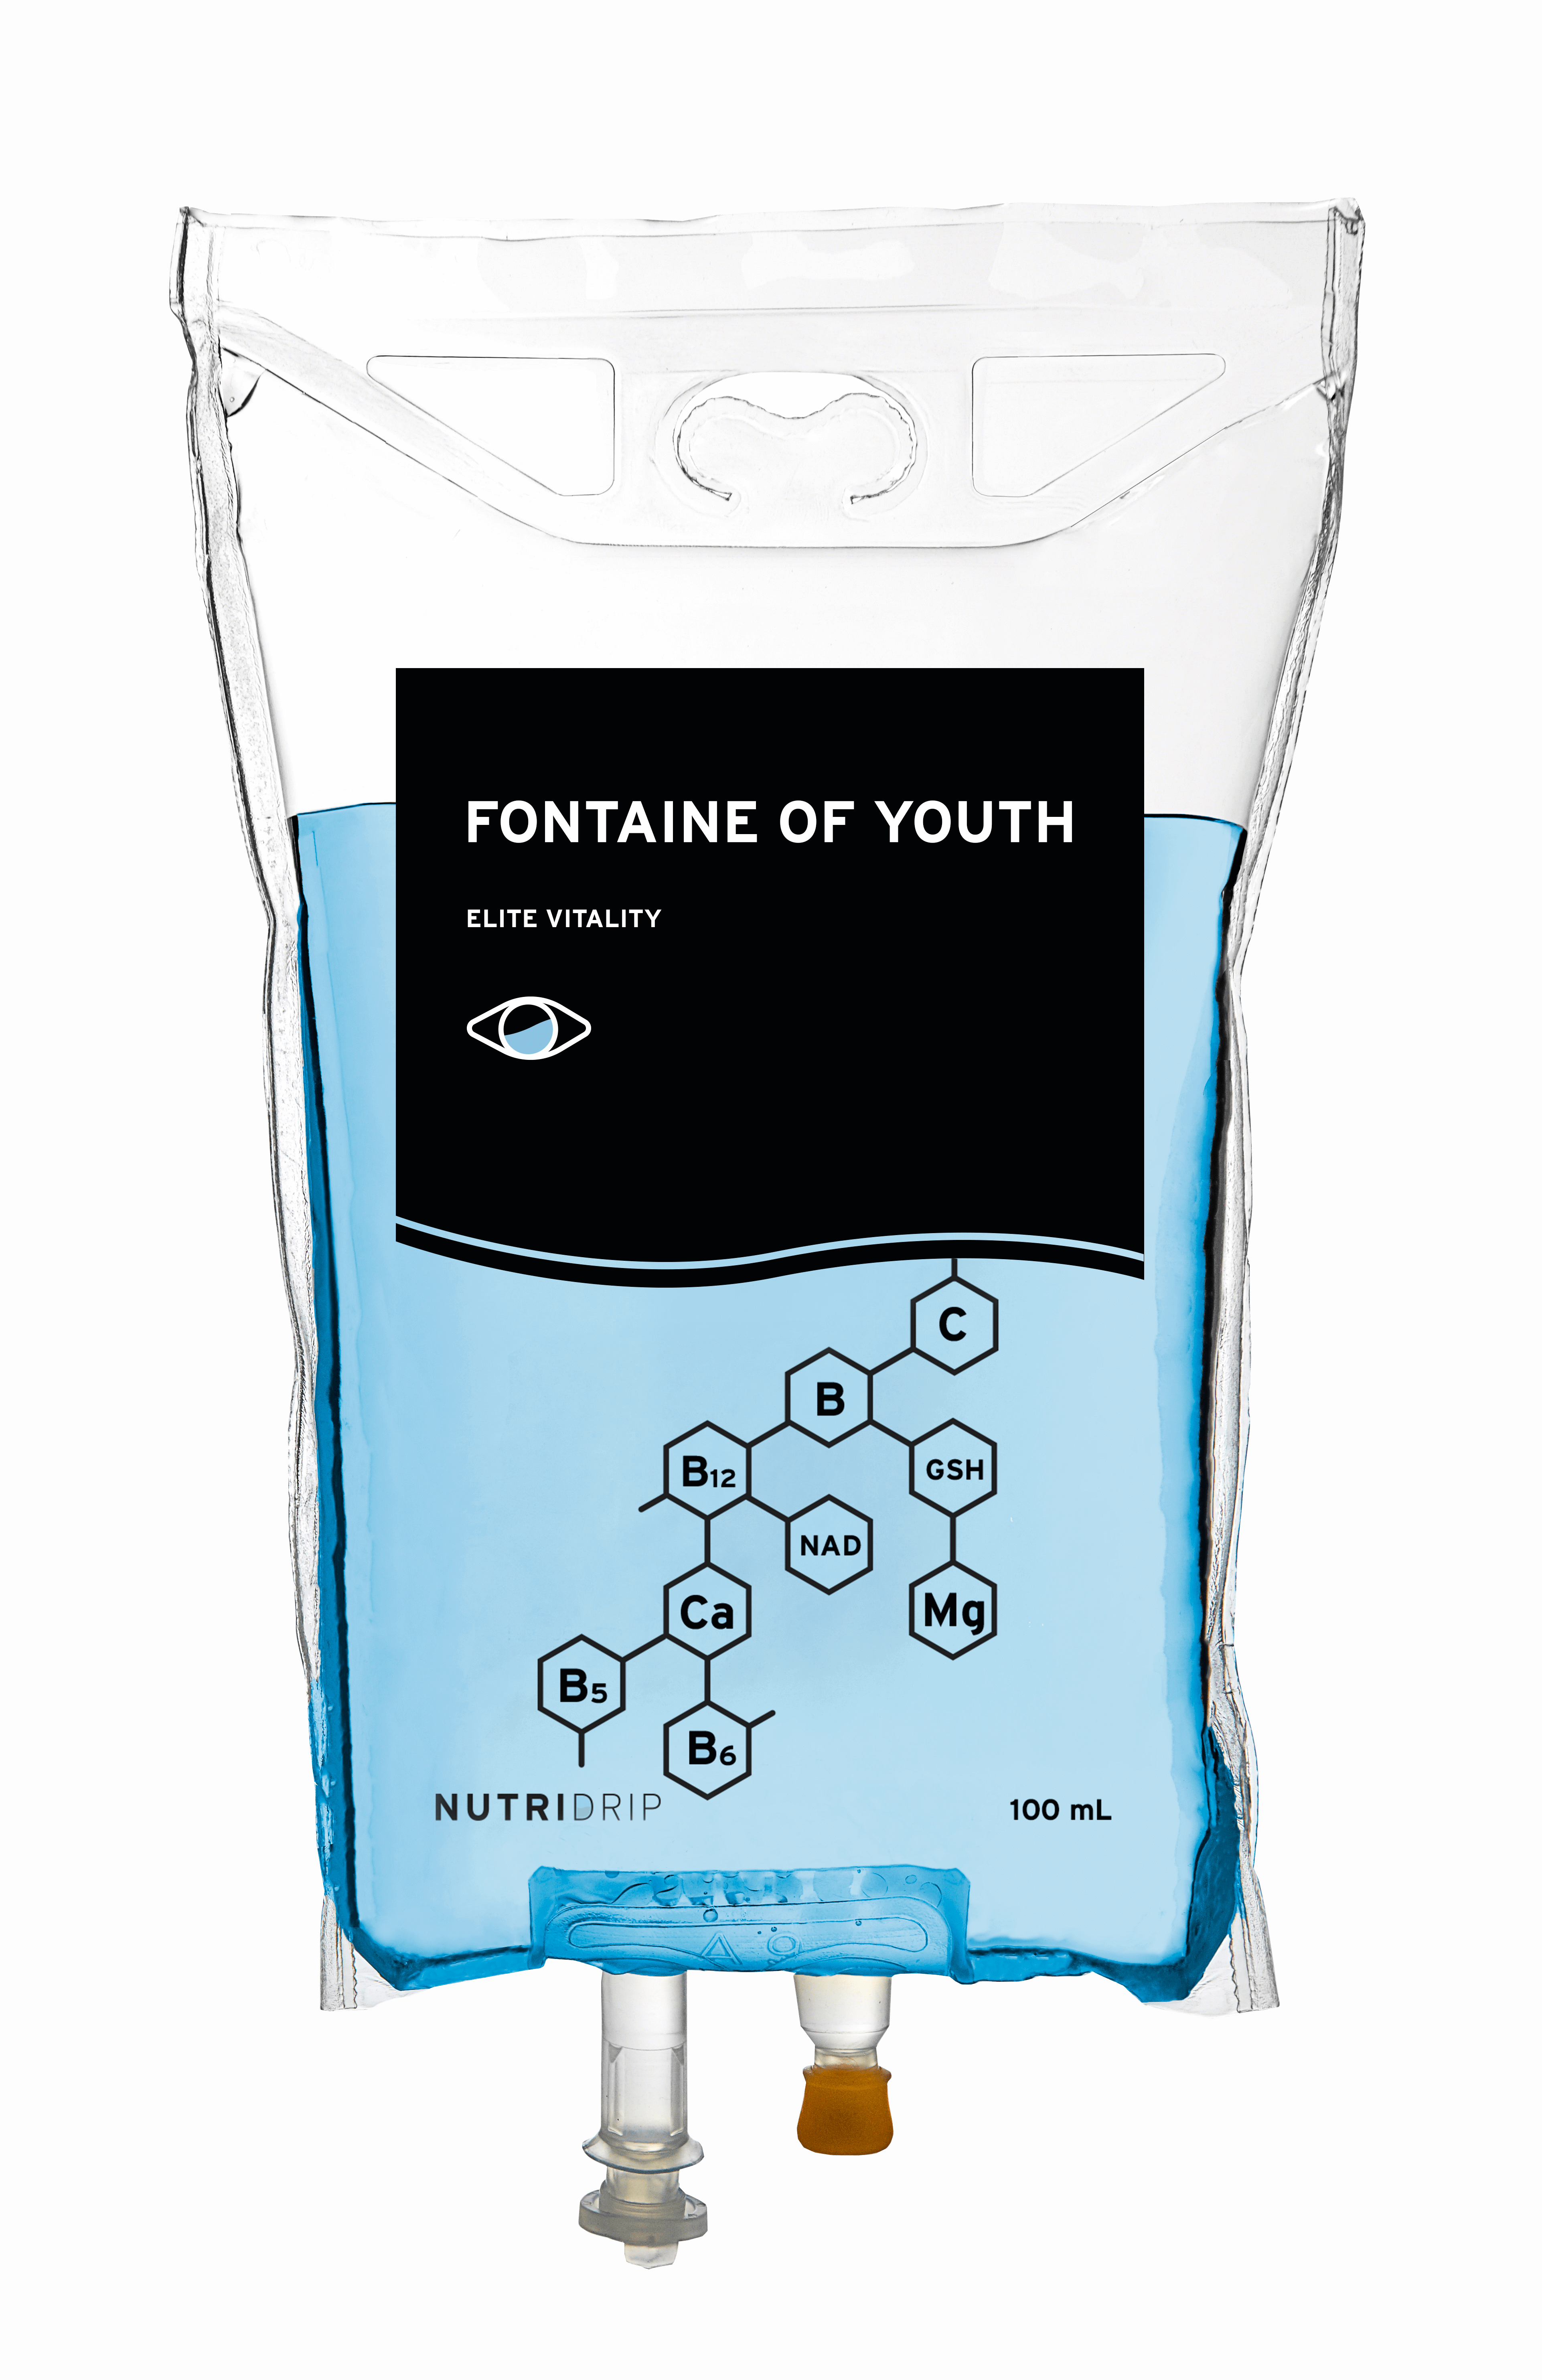 Fontaine of Youth IV Drip